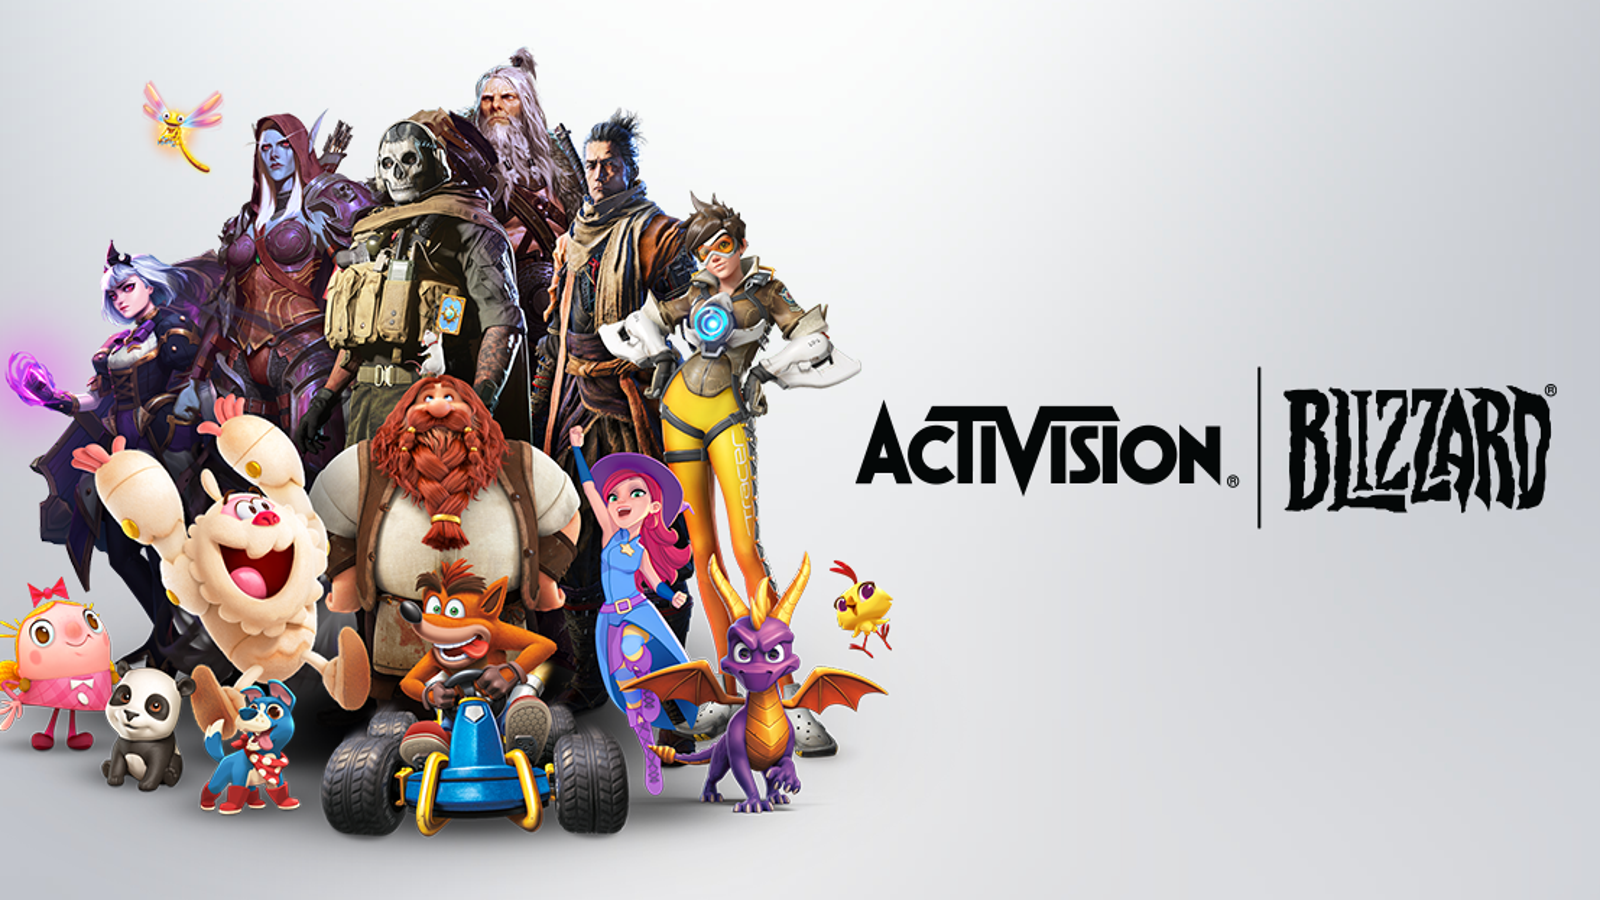 UK Expected To Approve Microsoft-Activision Blizzard Merger This Week